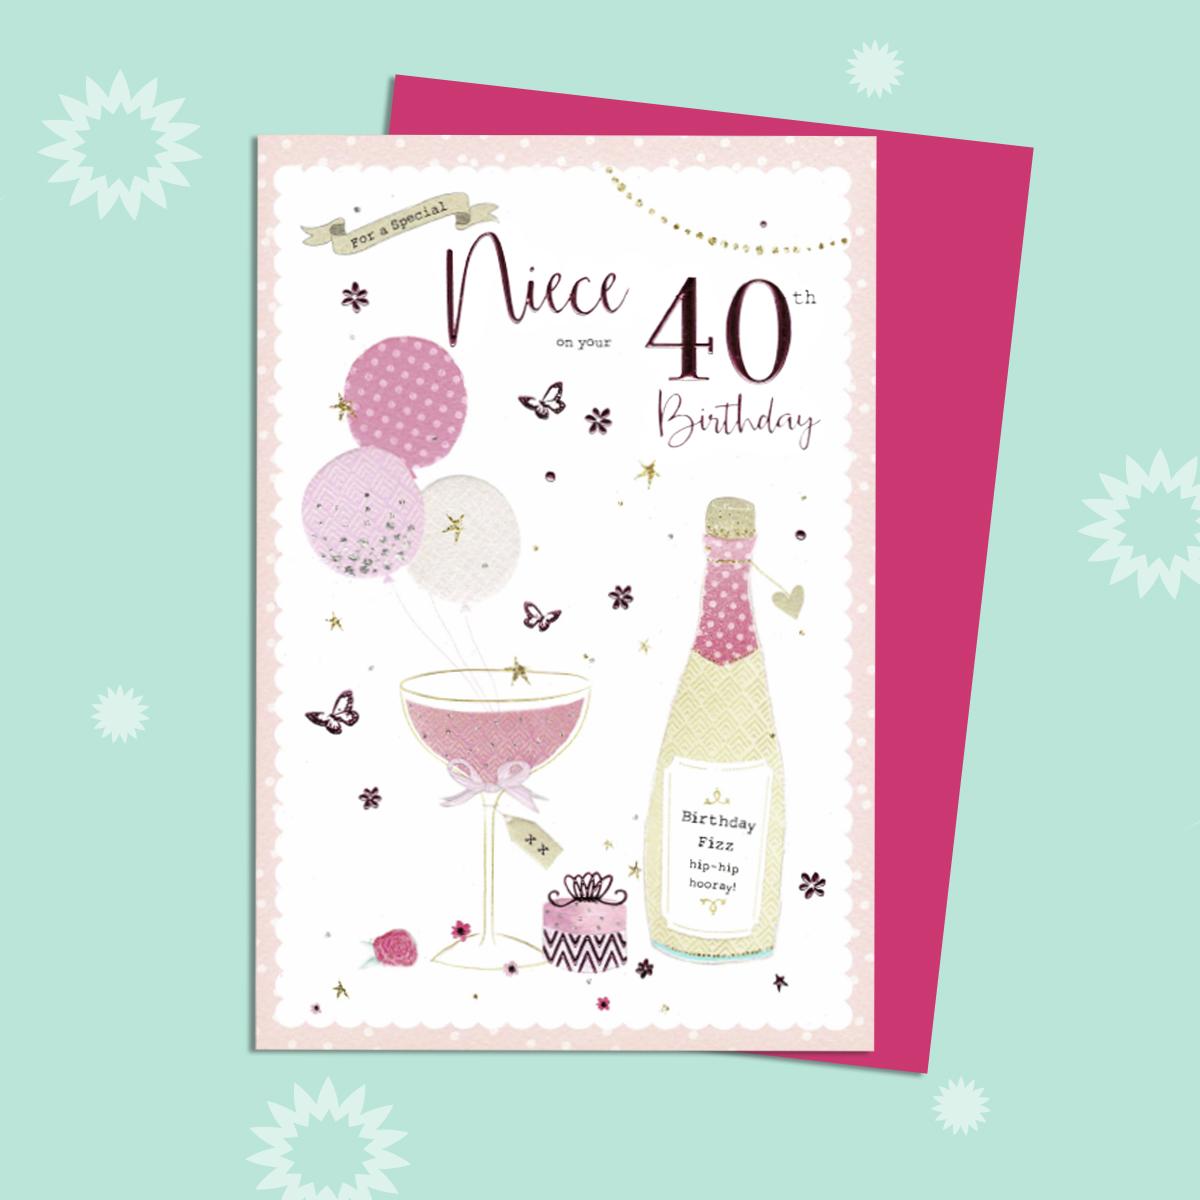 Niece Age 40 Birthday Card Front Image